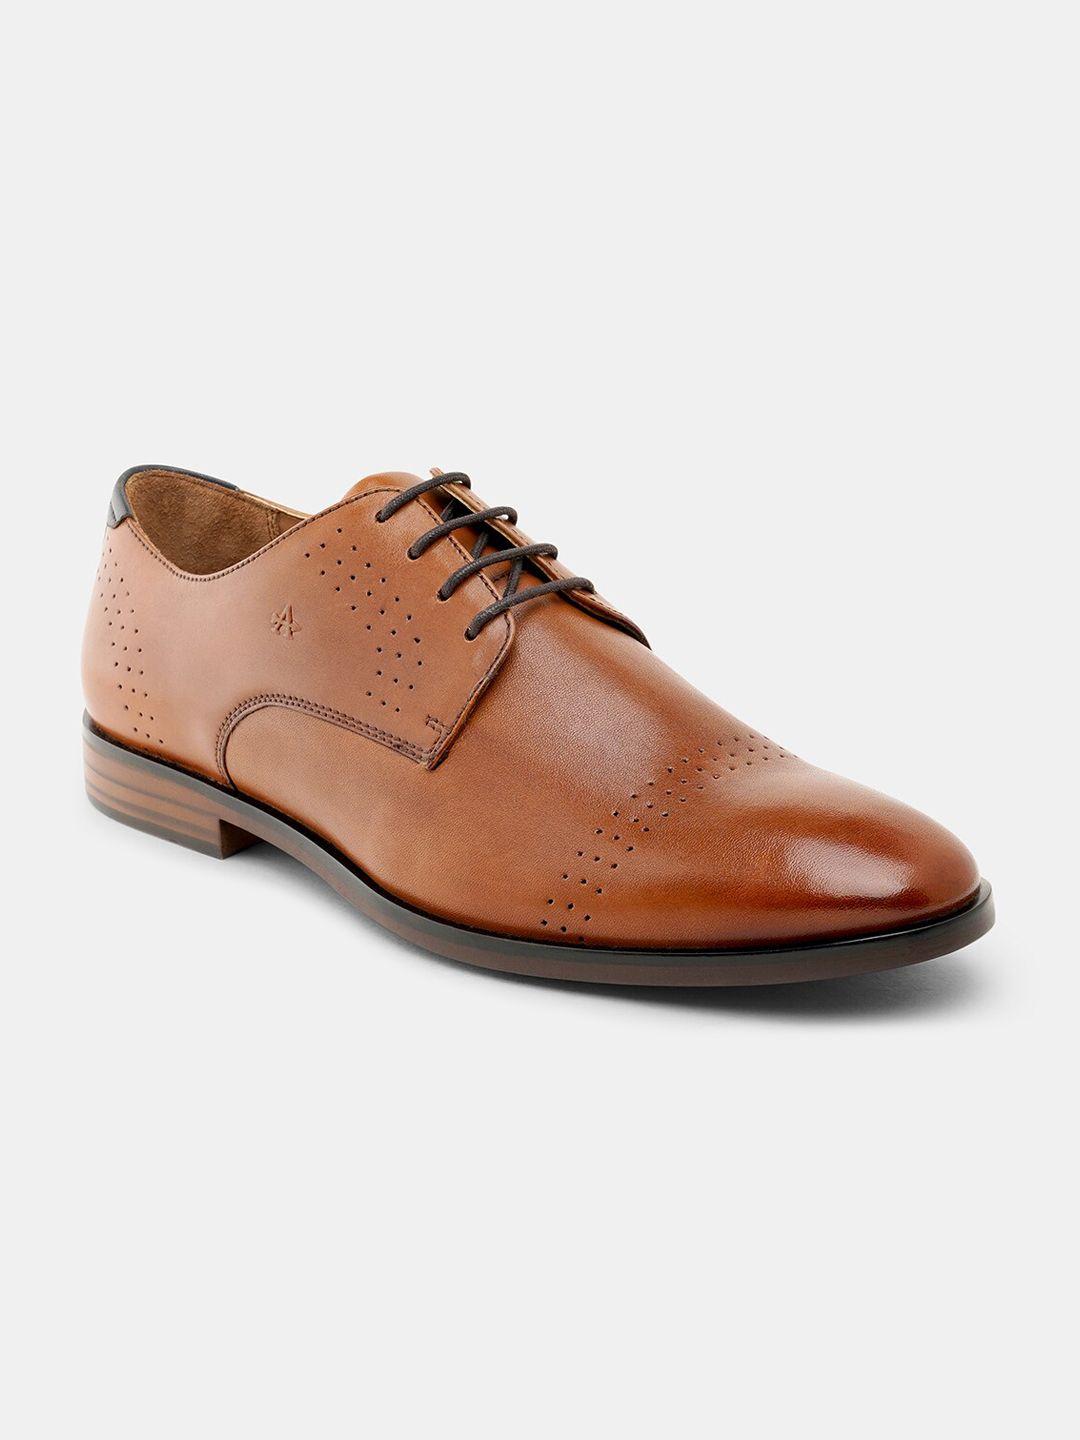 arrow men perforated leather formal derbys